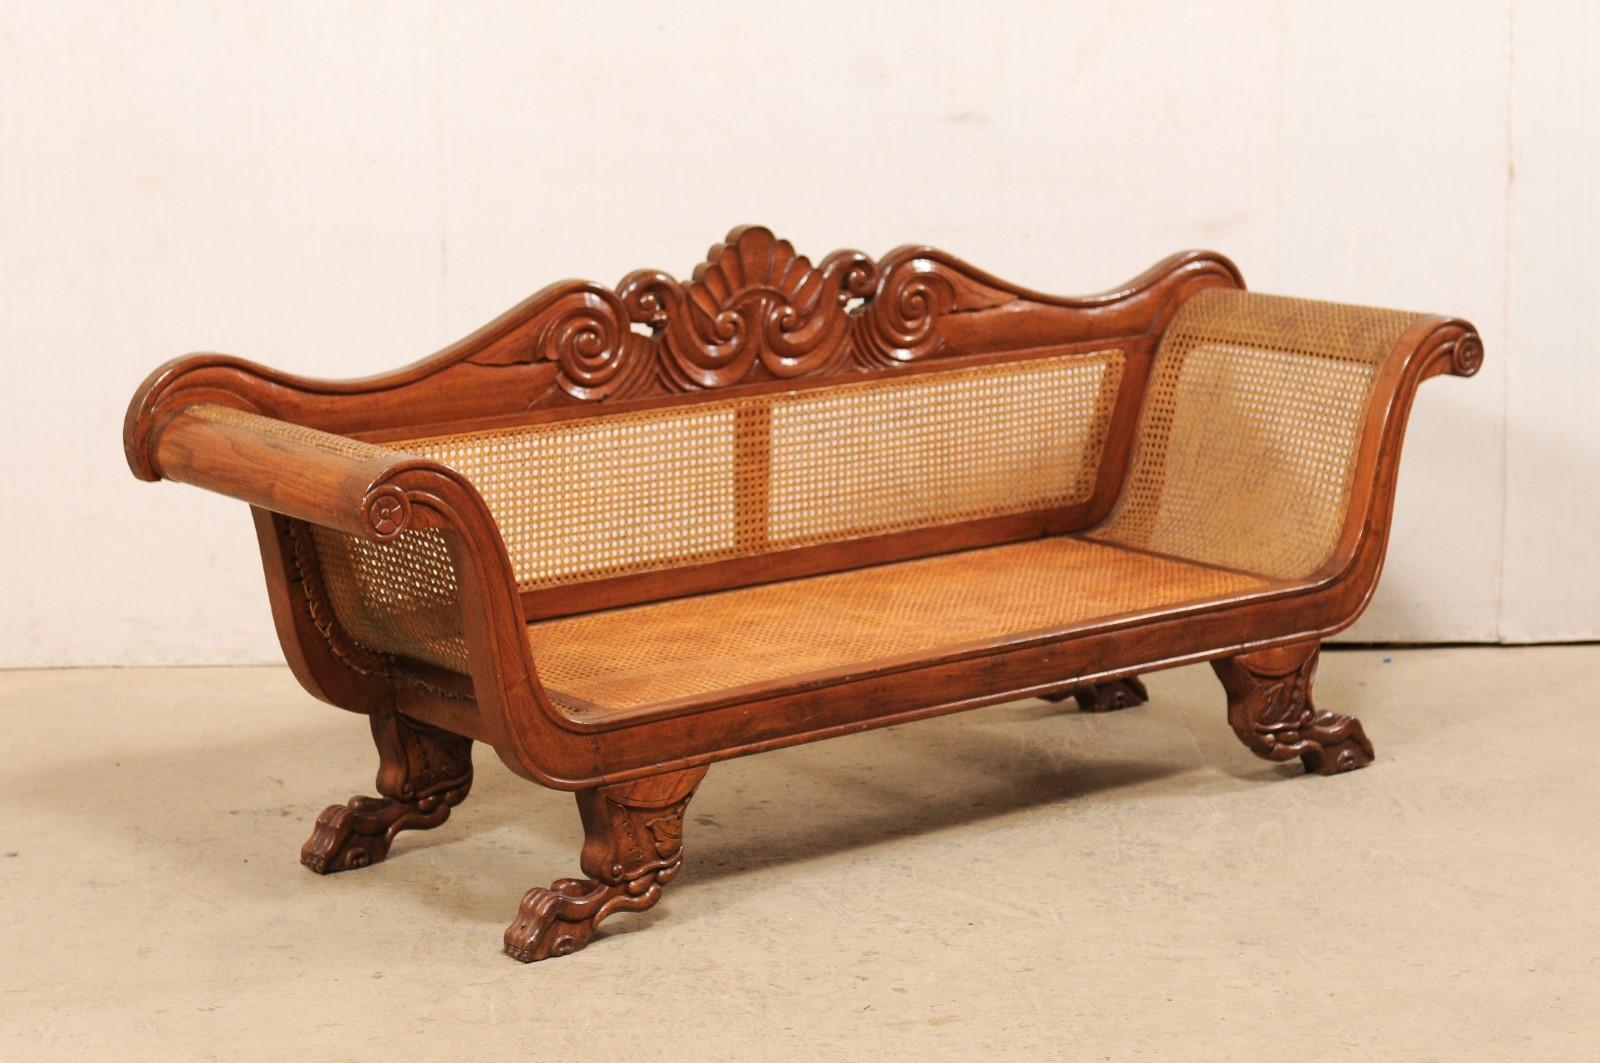 Antique Caribbean Regency Carved Wood and Hand Caned Sofa w/ Shell & Wave Crest In Good Condition For Sale In Atlanta, GA